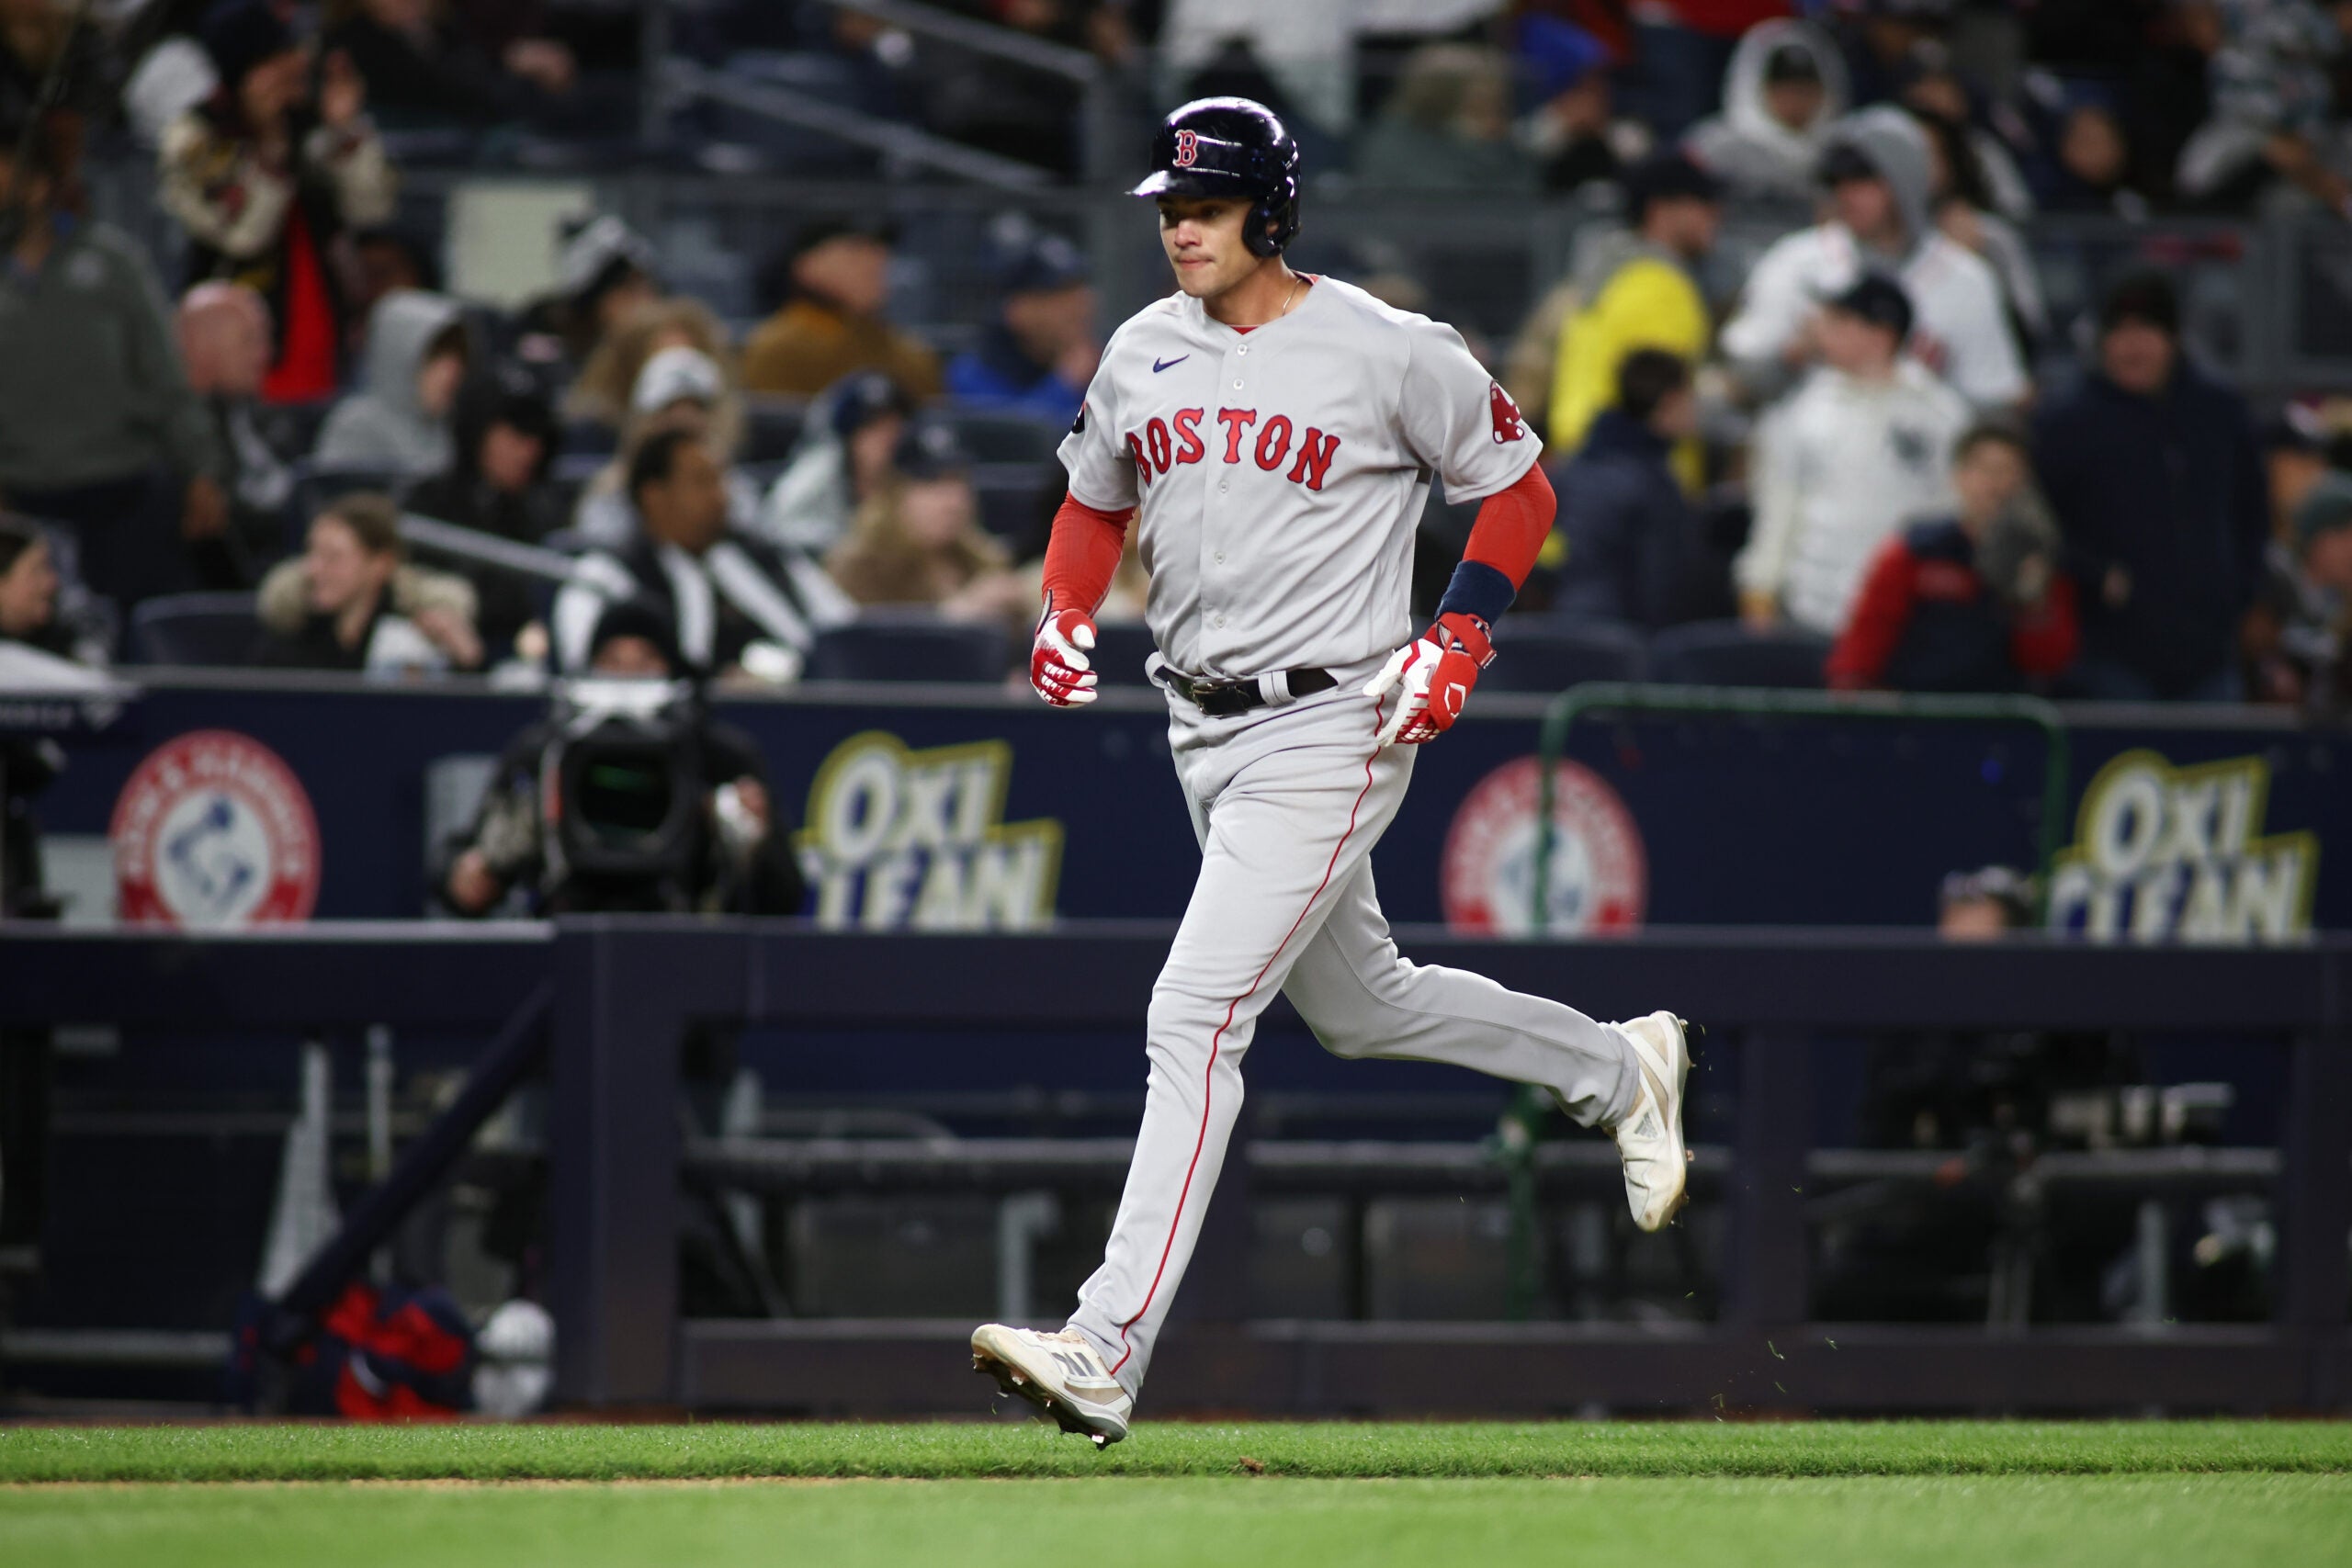 Bobby Dalbec's home run helps Red Sox avoid sweep, beat Yankees 4-3